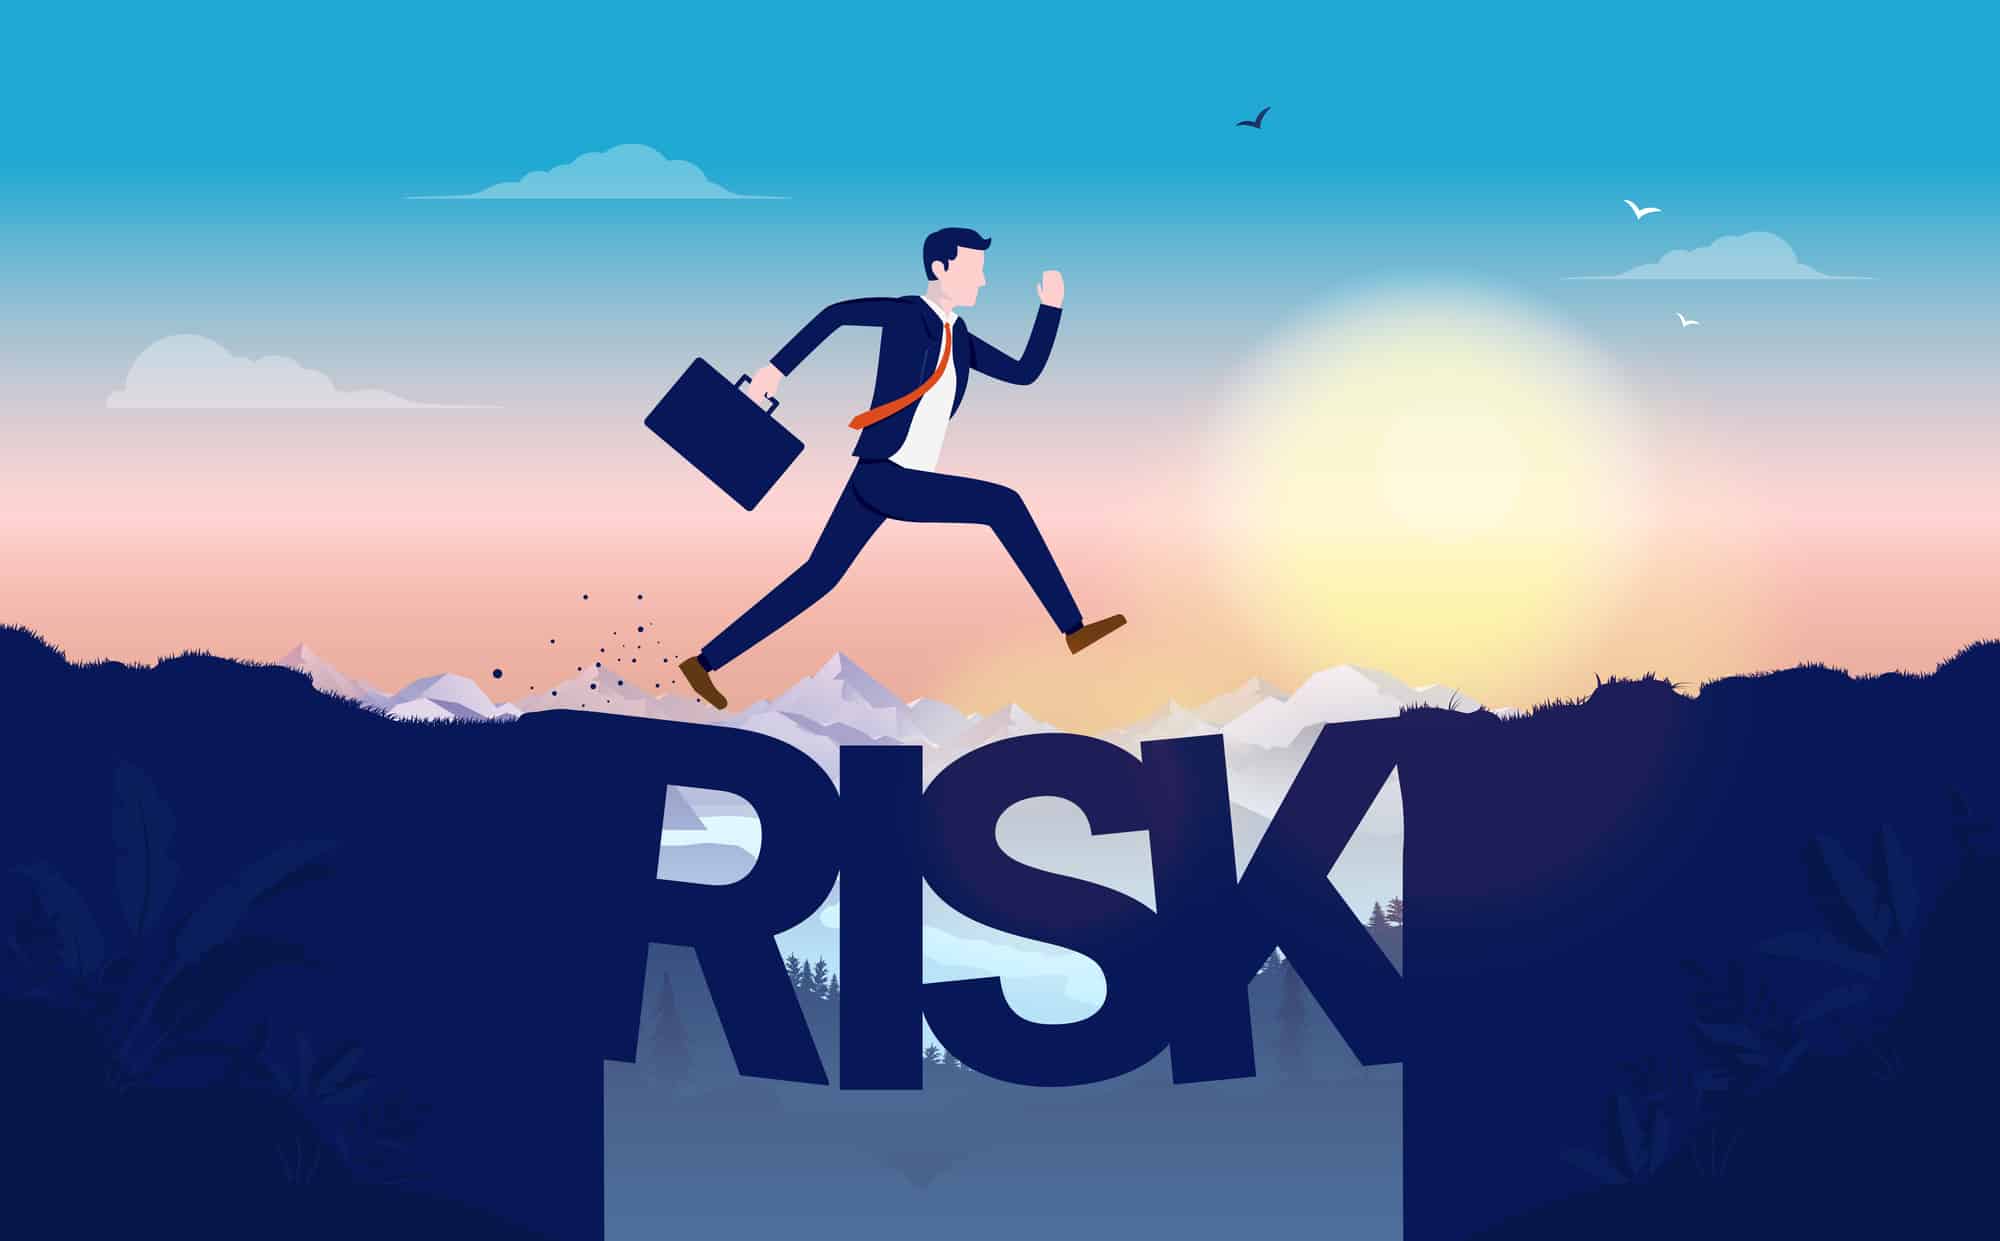 What Is Third-Party Risk Management?, ERM